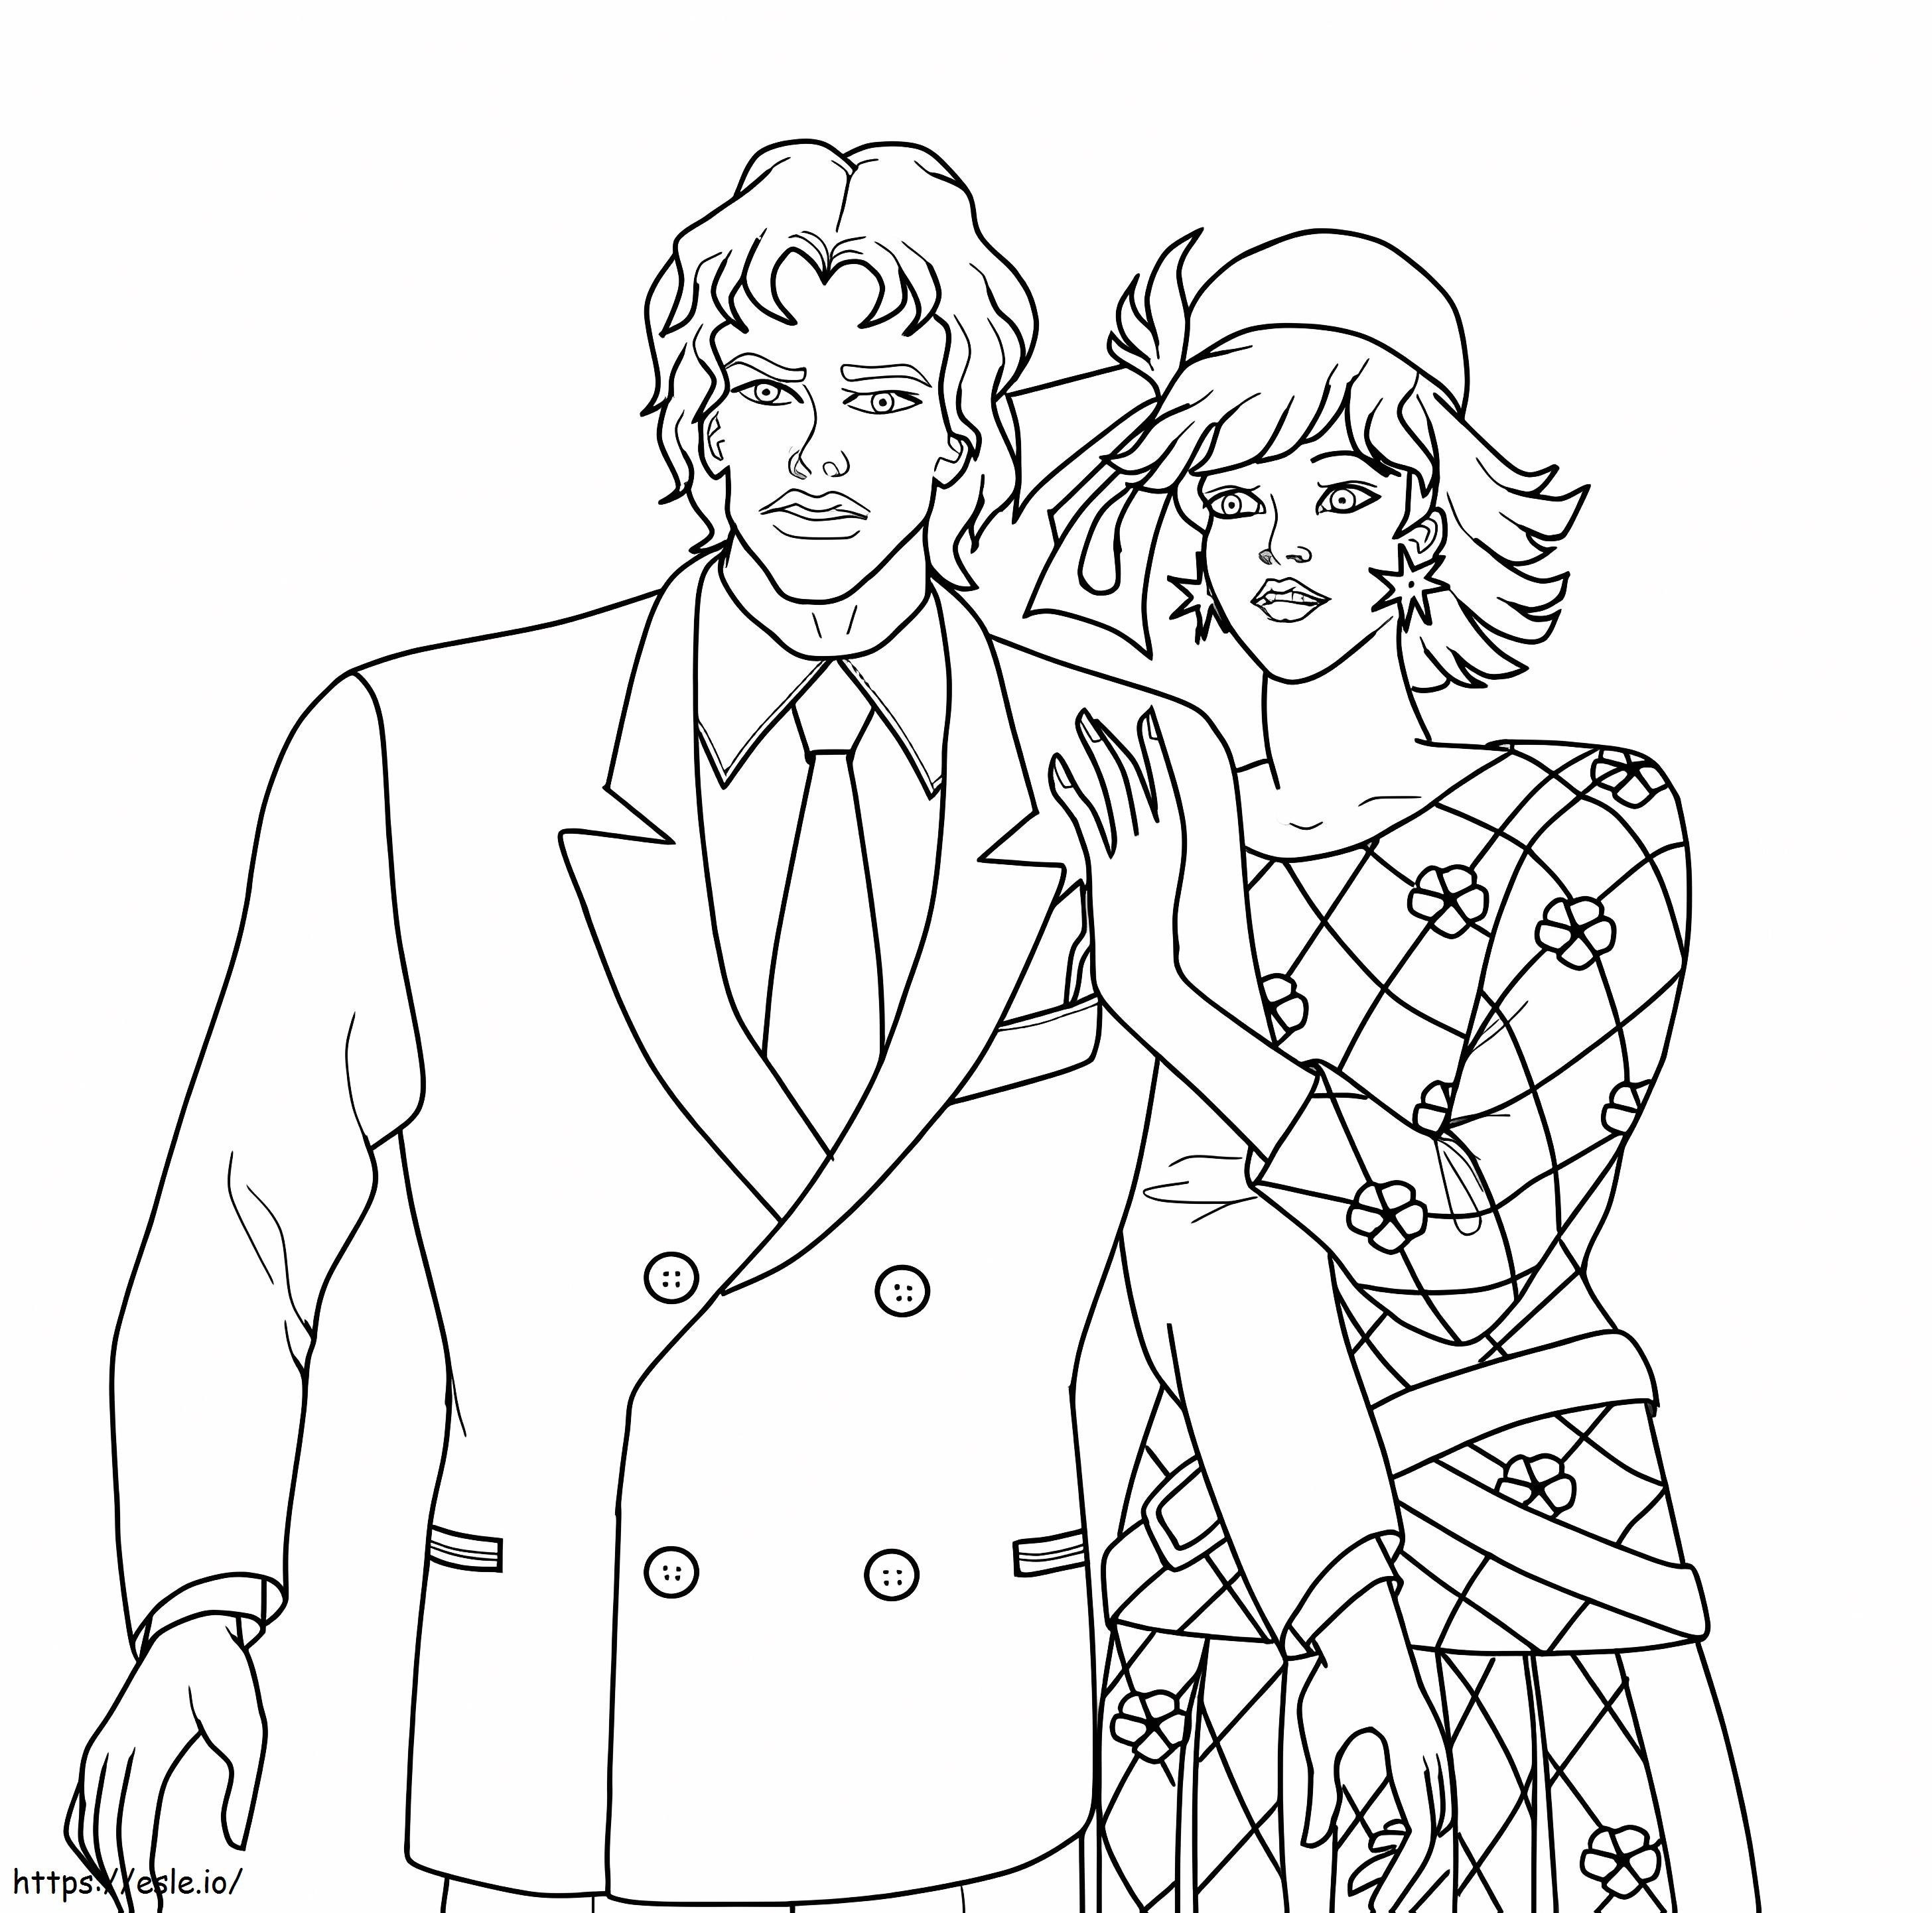 Jem And The Holograms 7 coloring page